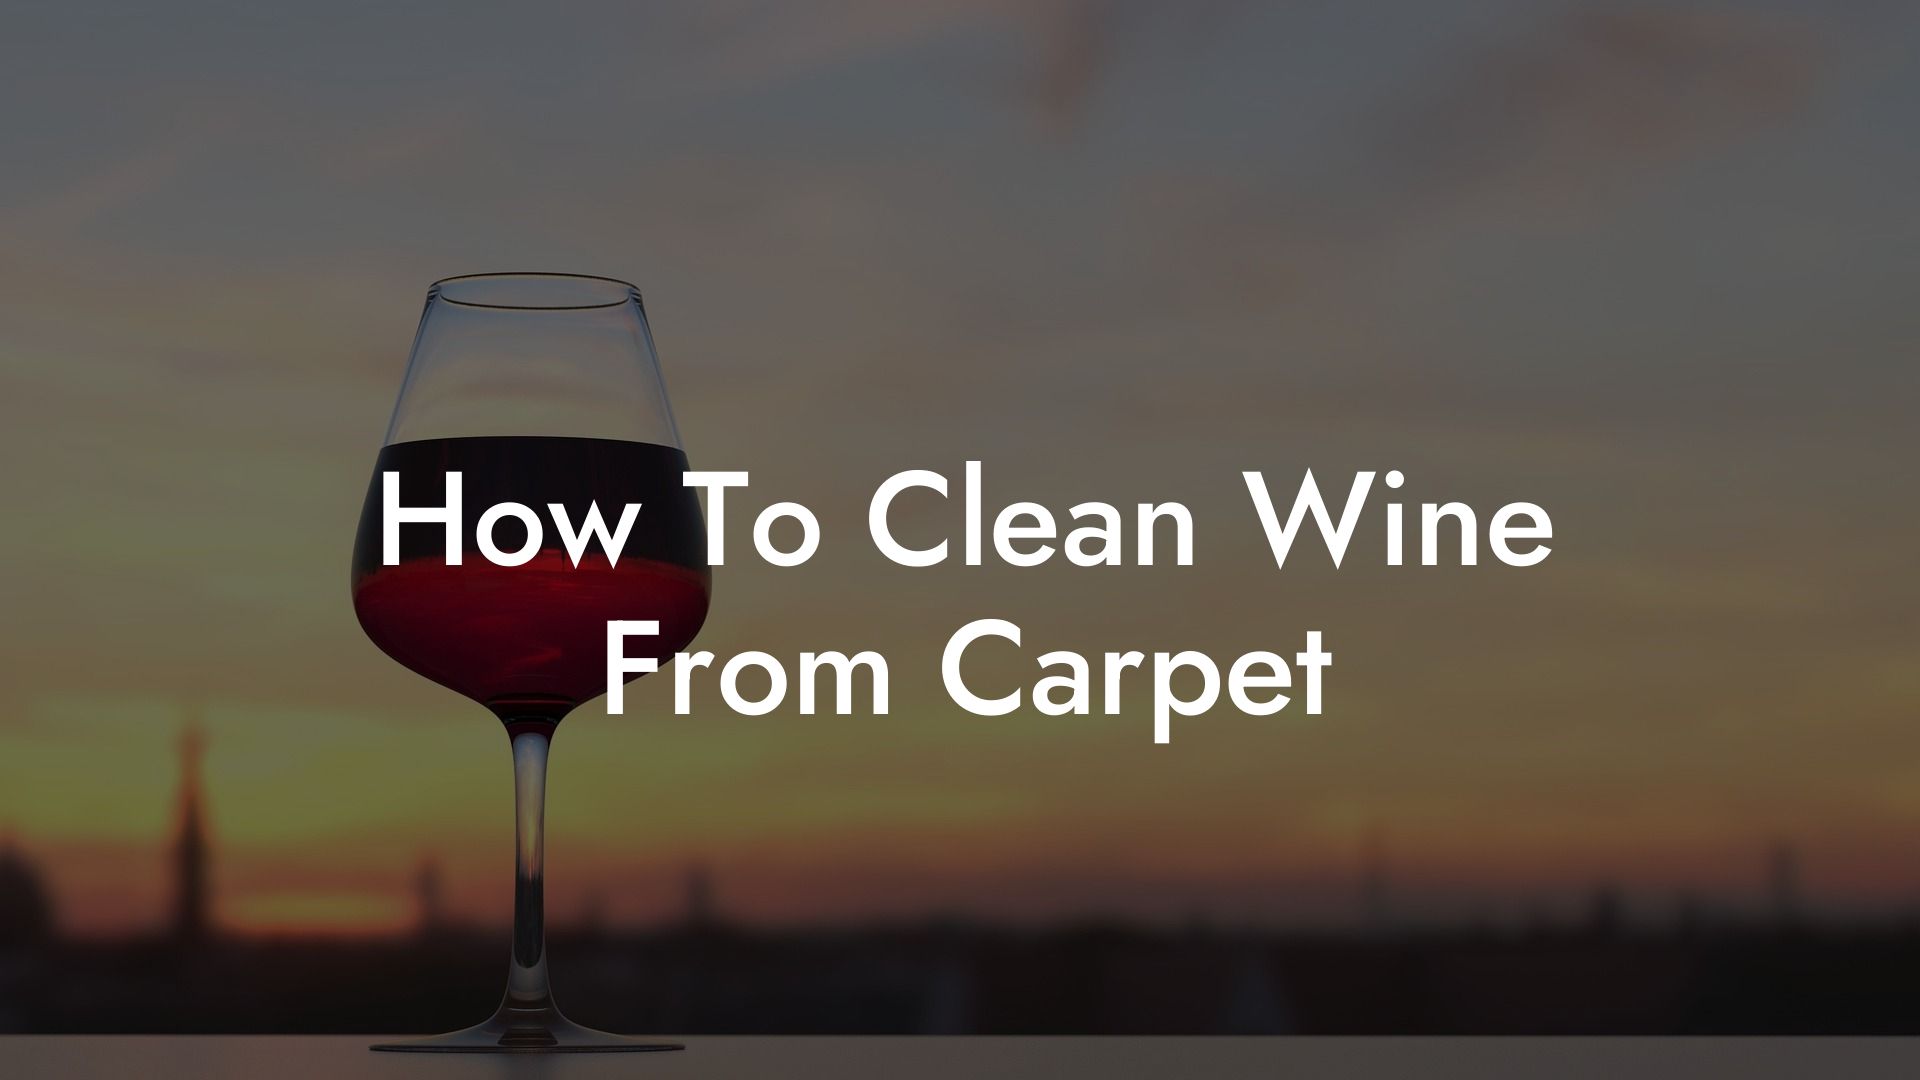 How To Clean Wine From Carpet